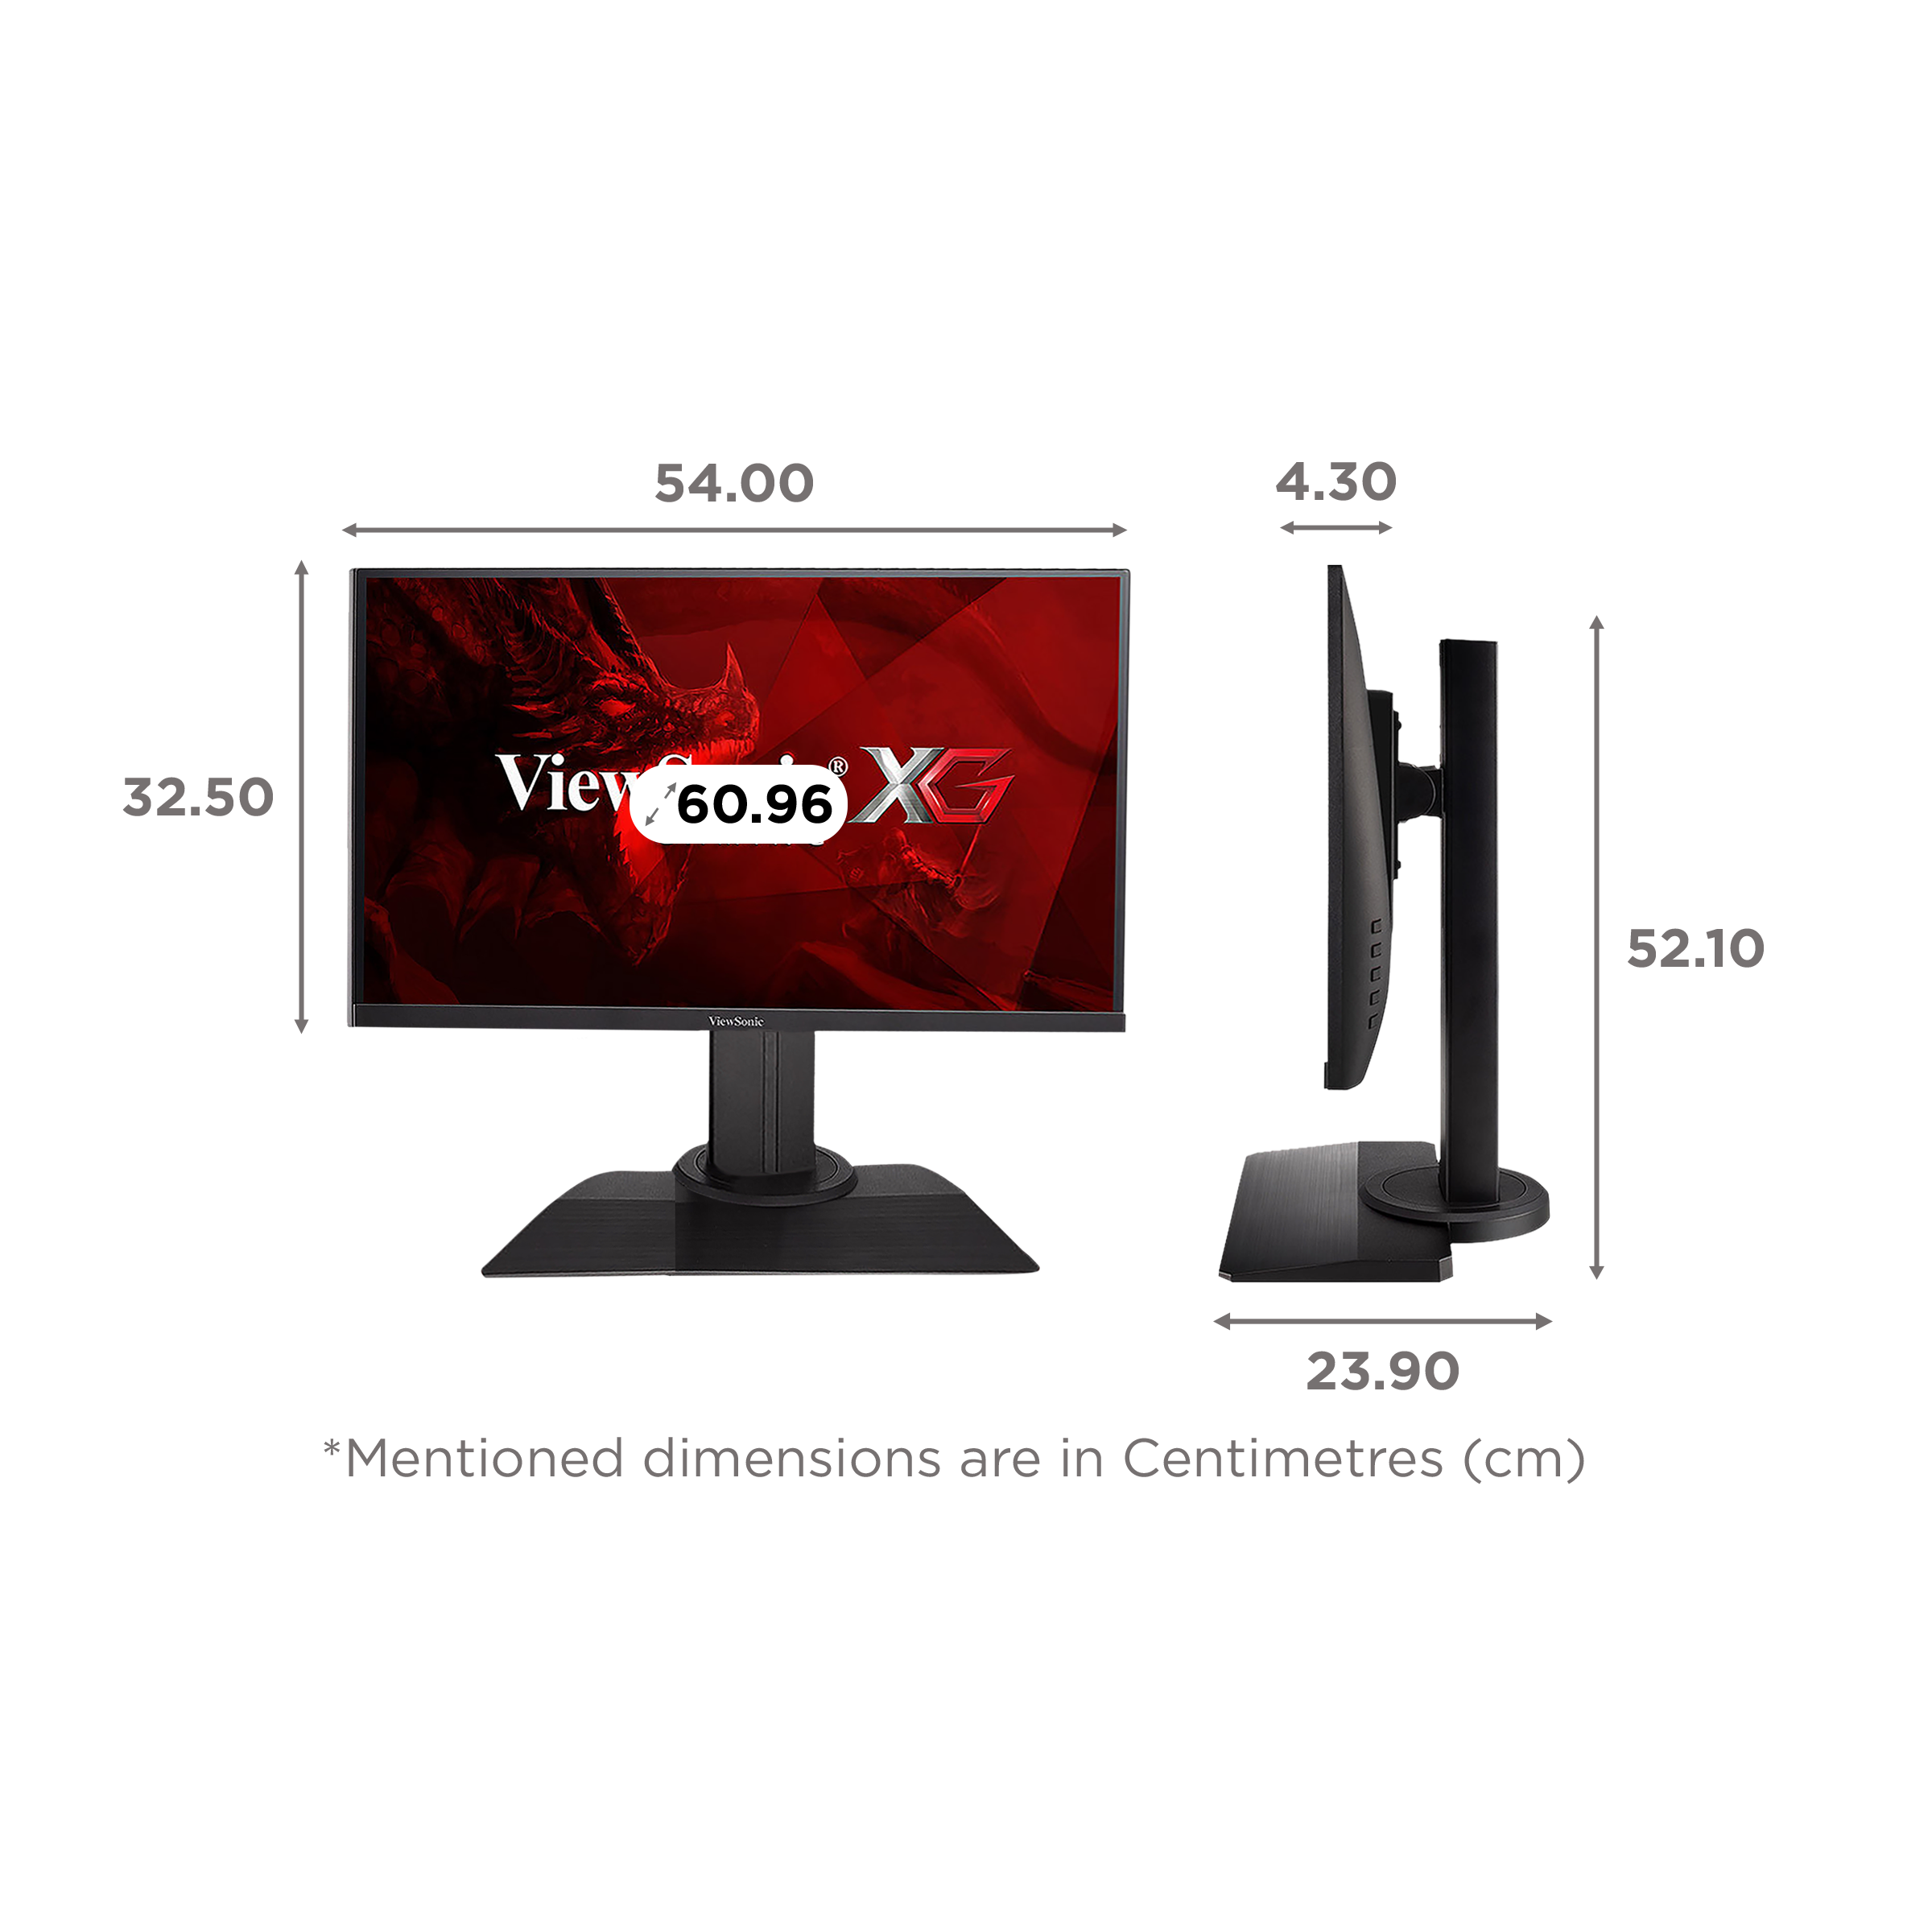 ViewSonic XG 60.96 cm (24 inch) Full HD IPS Panel LED 3-Side Borderless Height Adjustable Gaming Monitor with Flicker-Free Technology_2